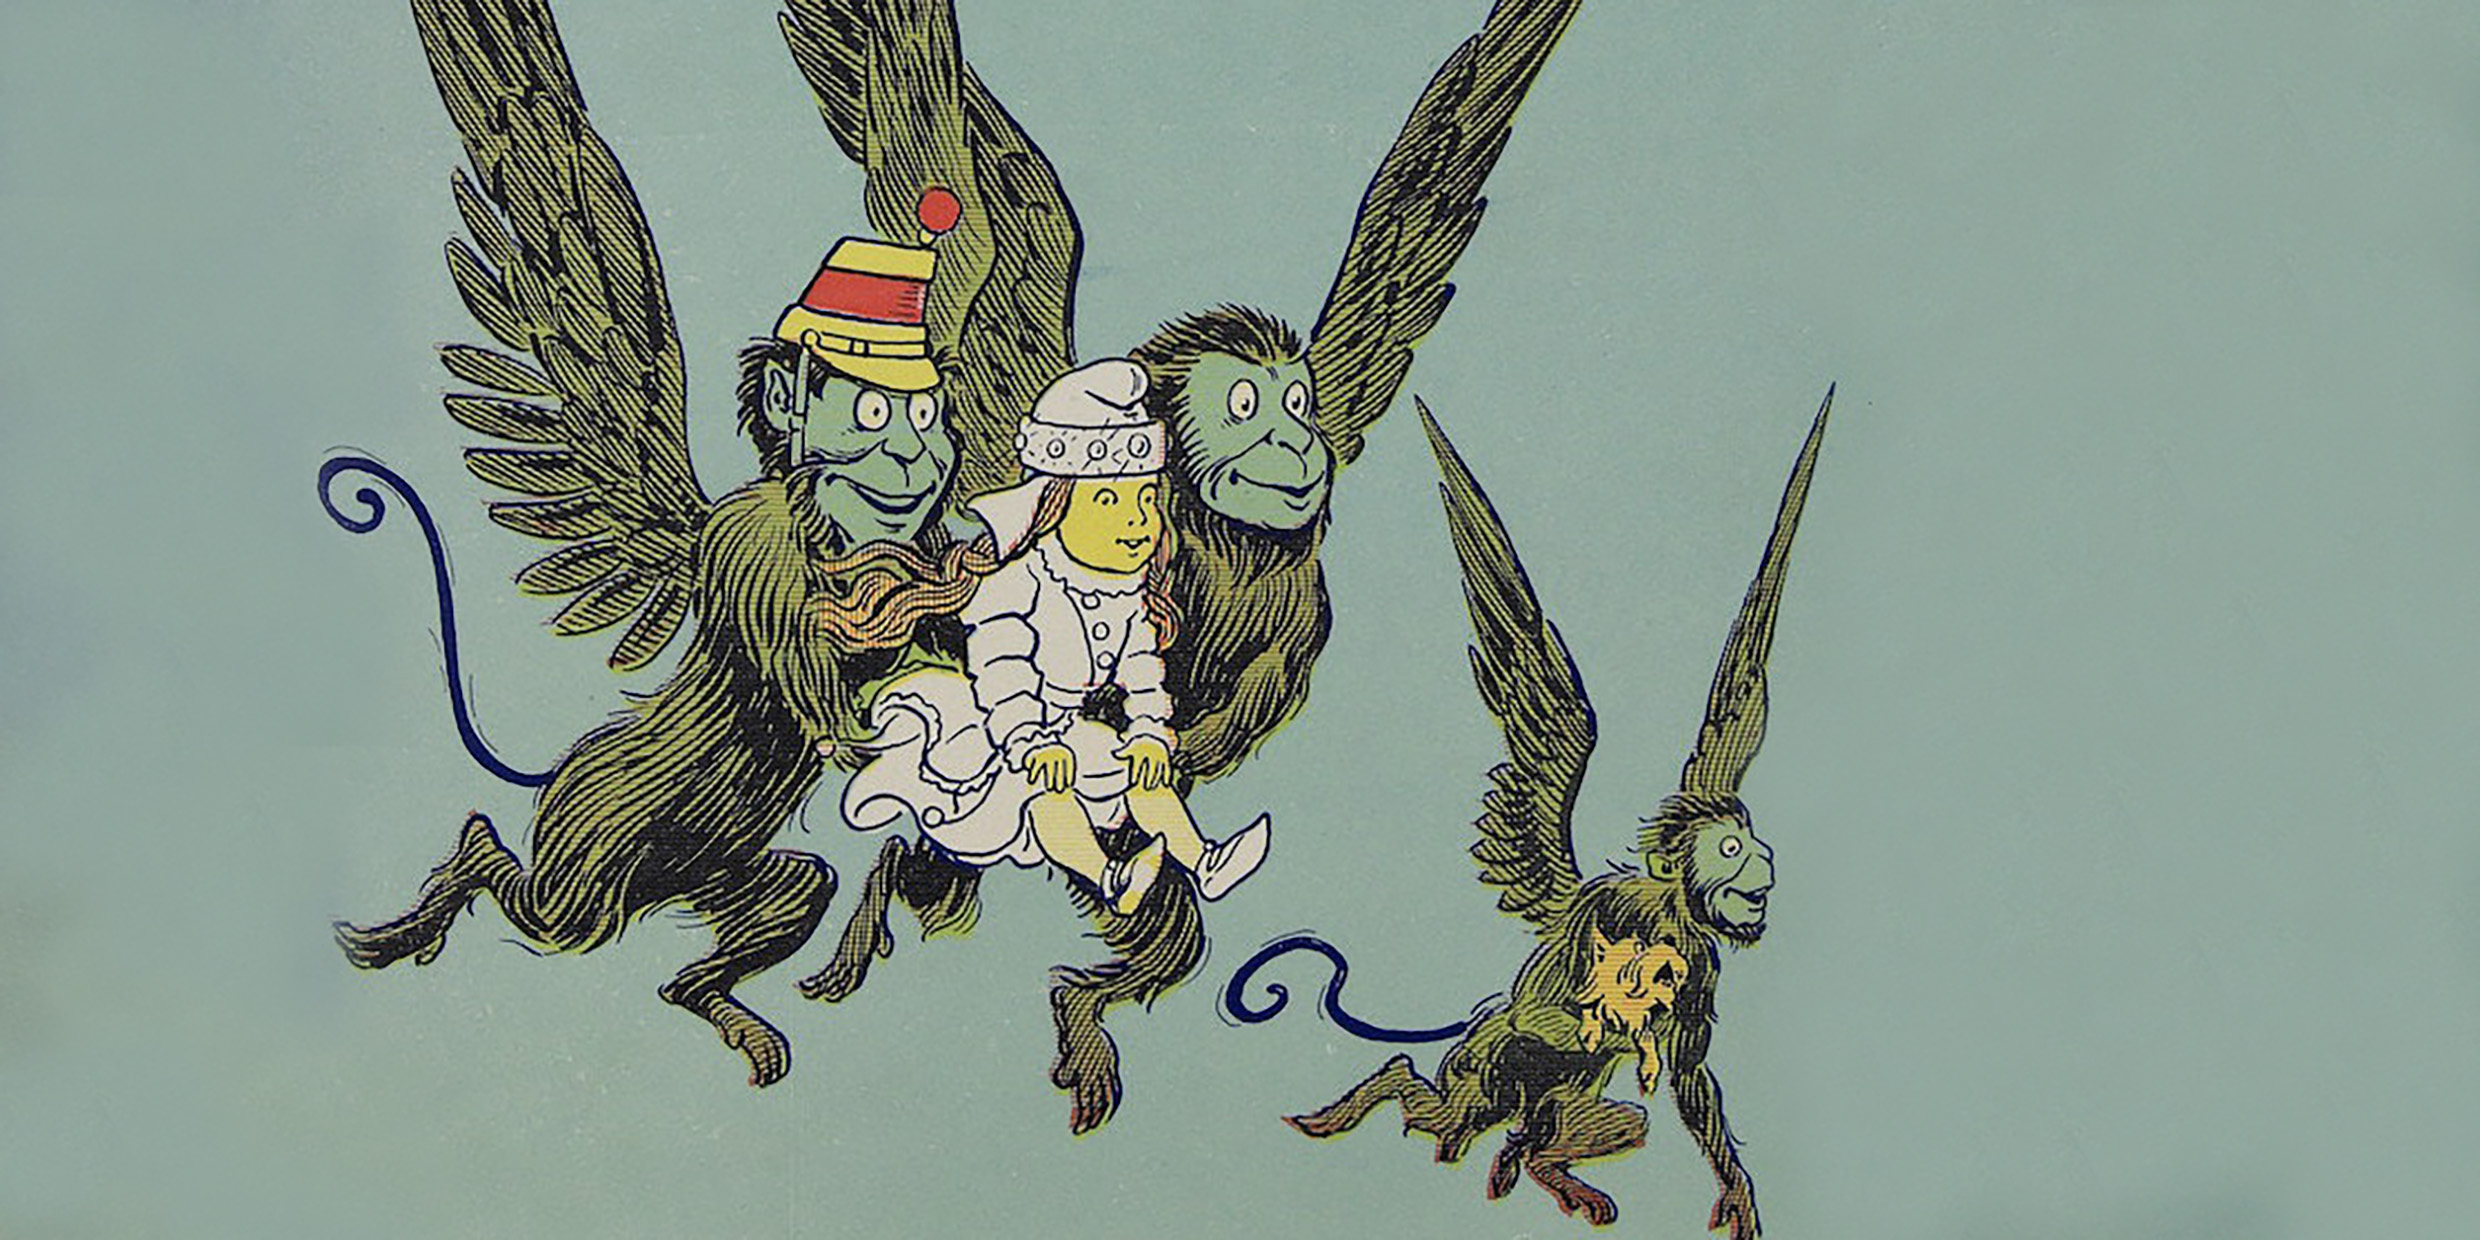 Illustration of Dorothy and the Winged Monkeys from "The Wizard of Oz"